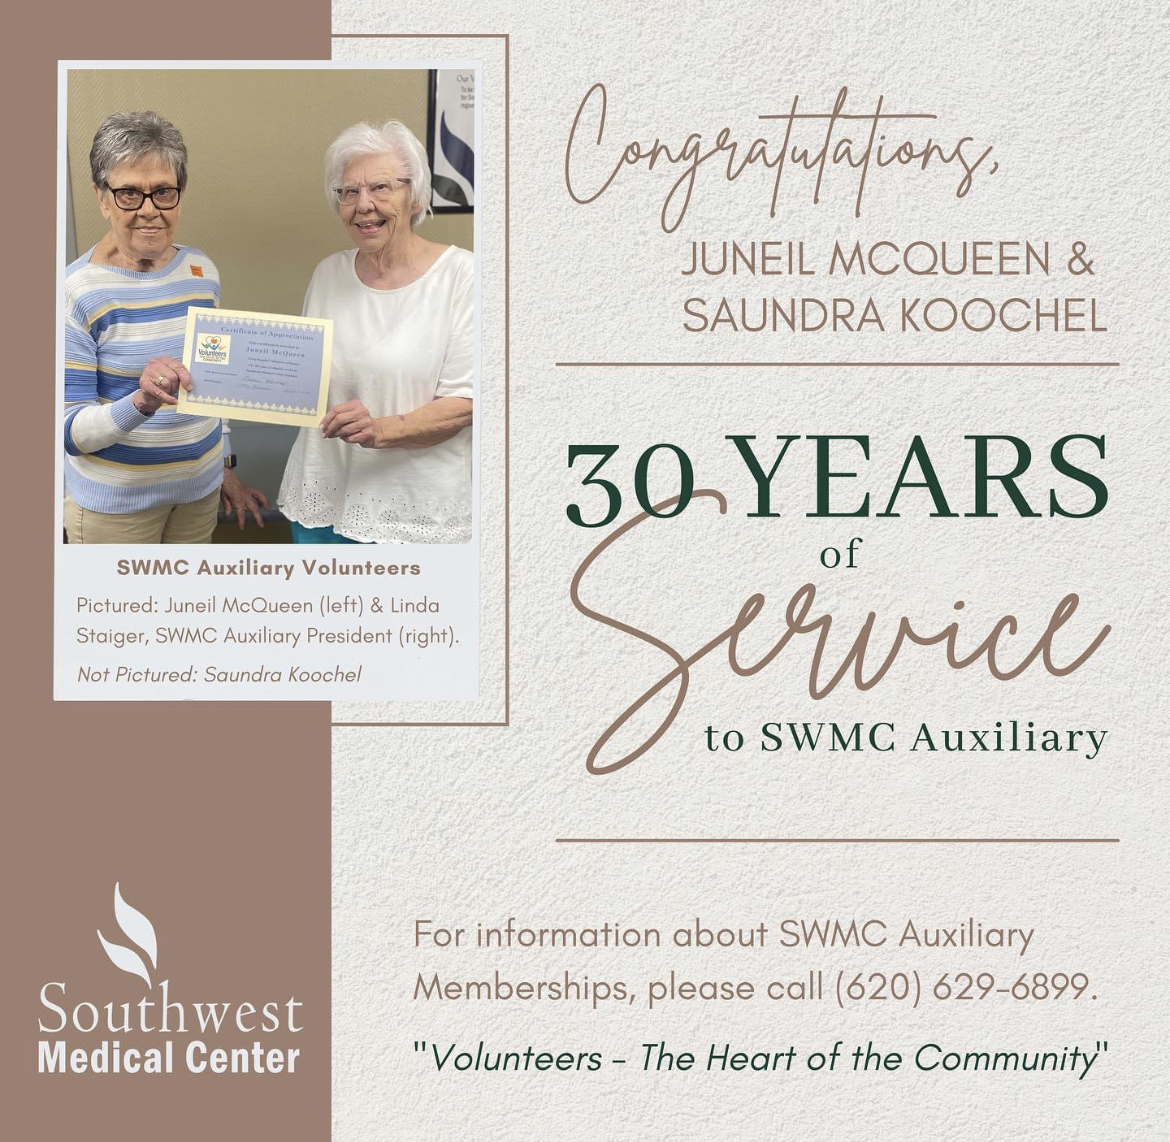 SWMC Auxiliary Honors McQueen and Koochel